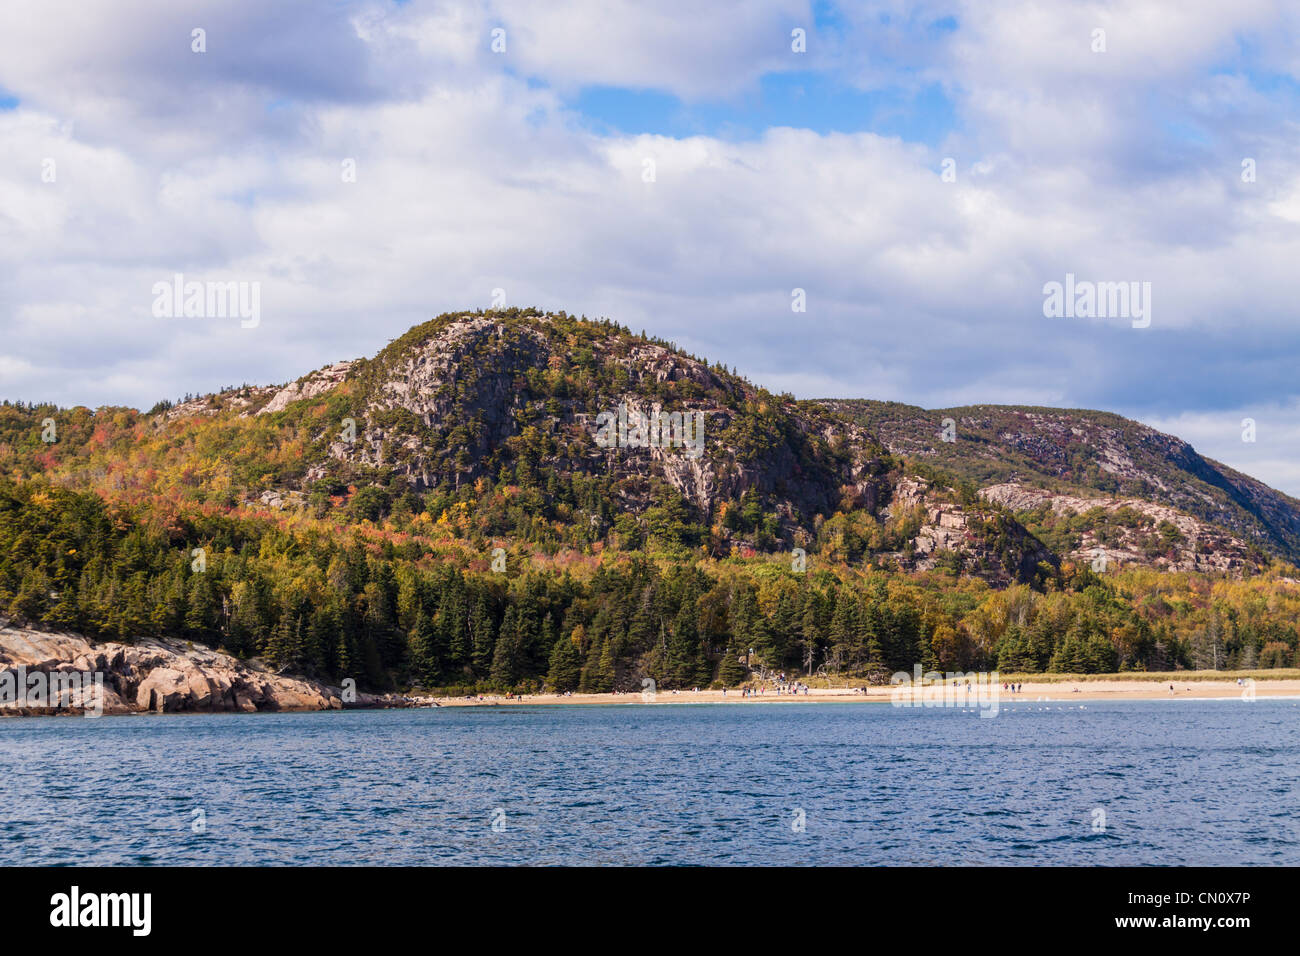 Sand Beach in Acadia National Park in Maine is a surprise in an area where beaches are rare amid rough and rugged coastlines. Stock Photo